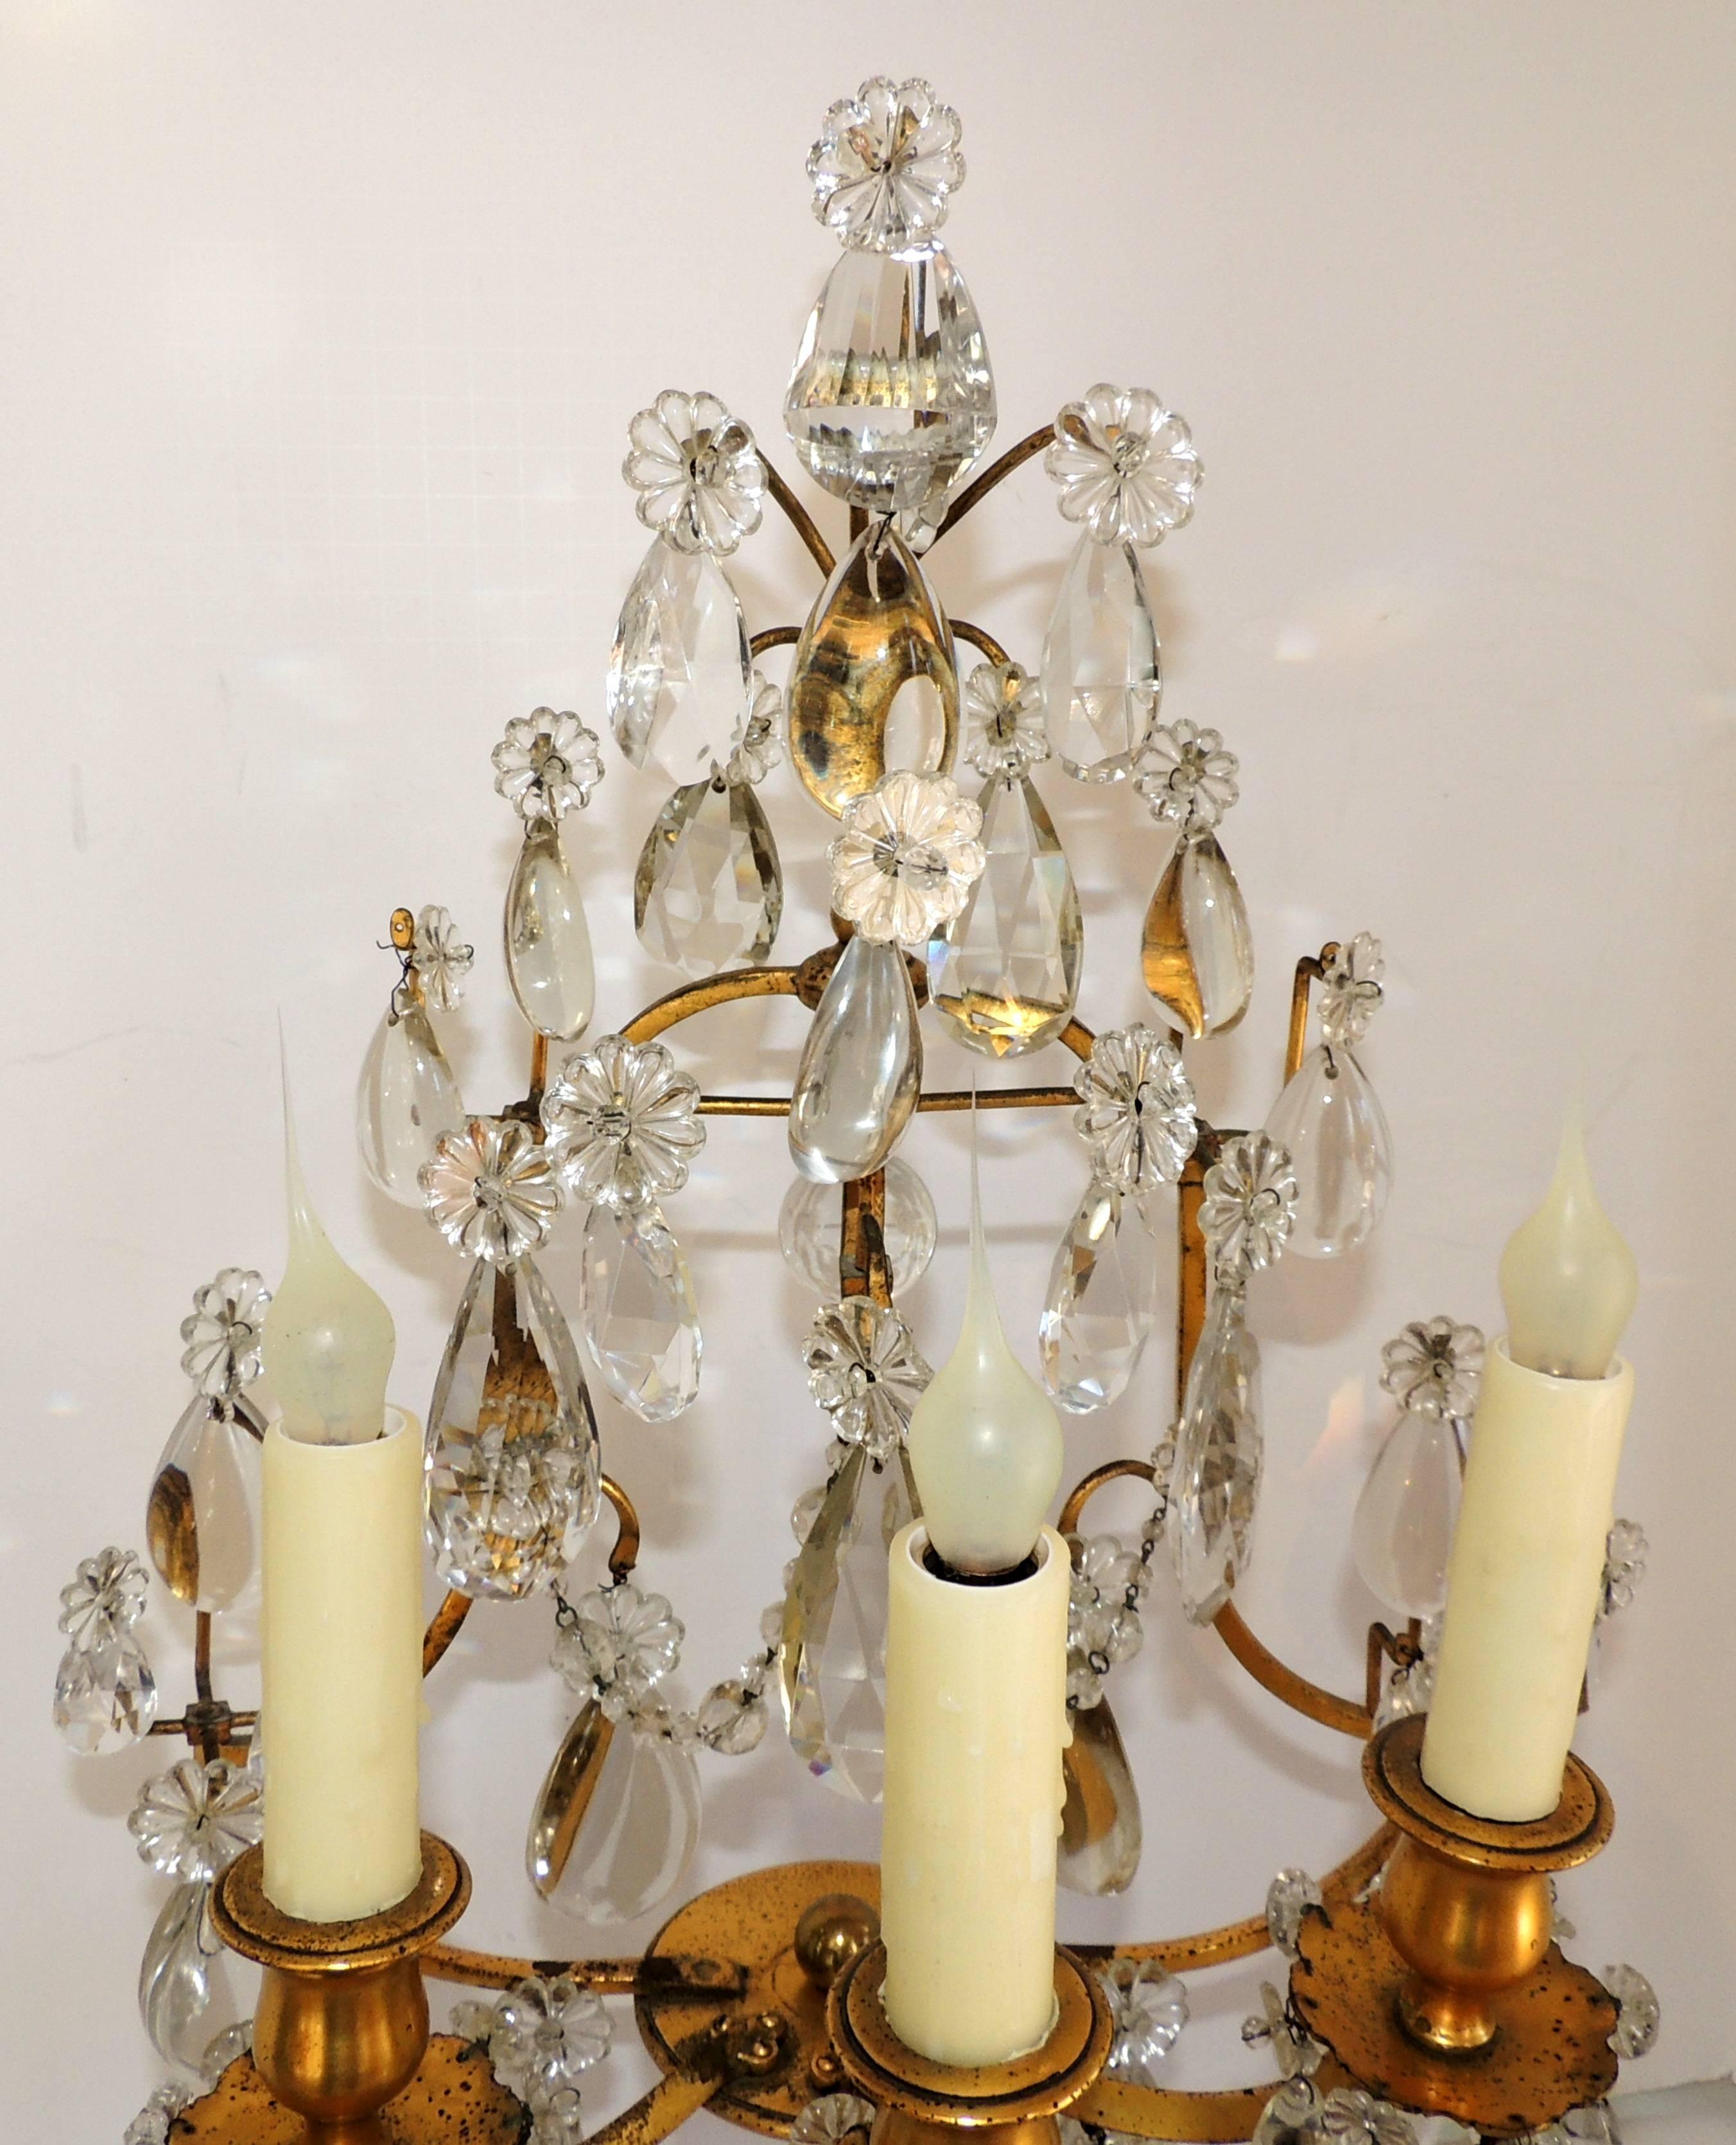 A wonderful pair of French doré bronze and crystal girandoles / candelabras with three lights as lamps.